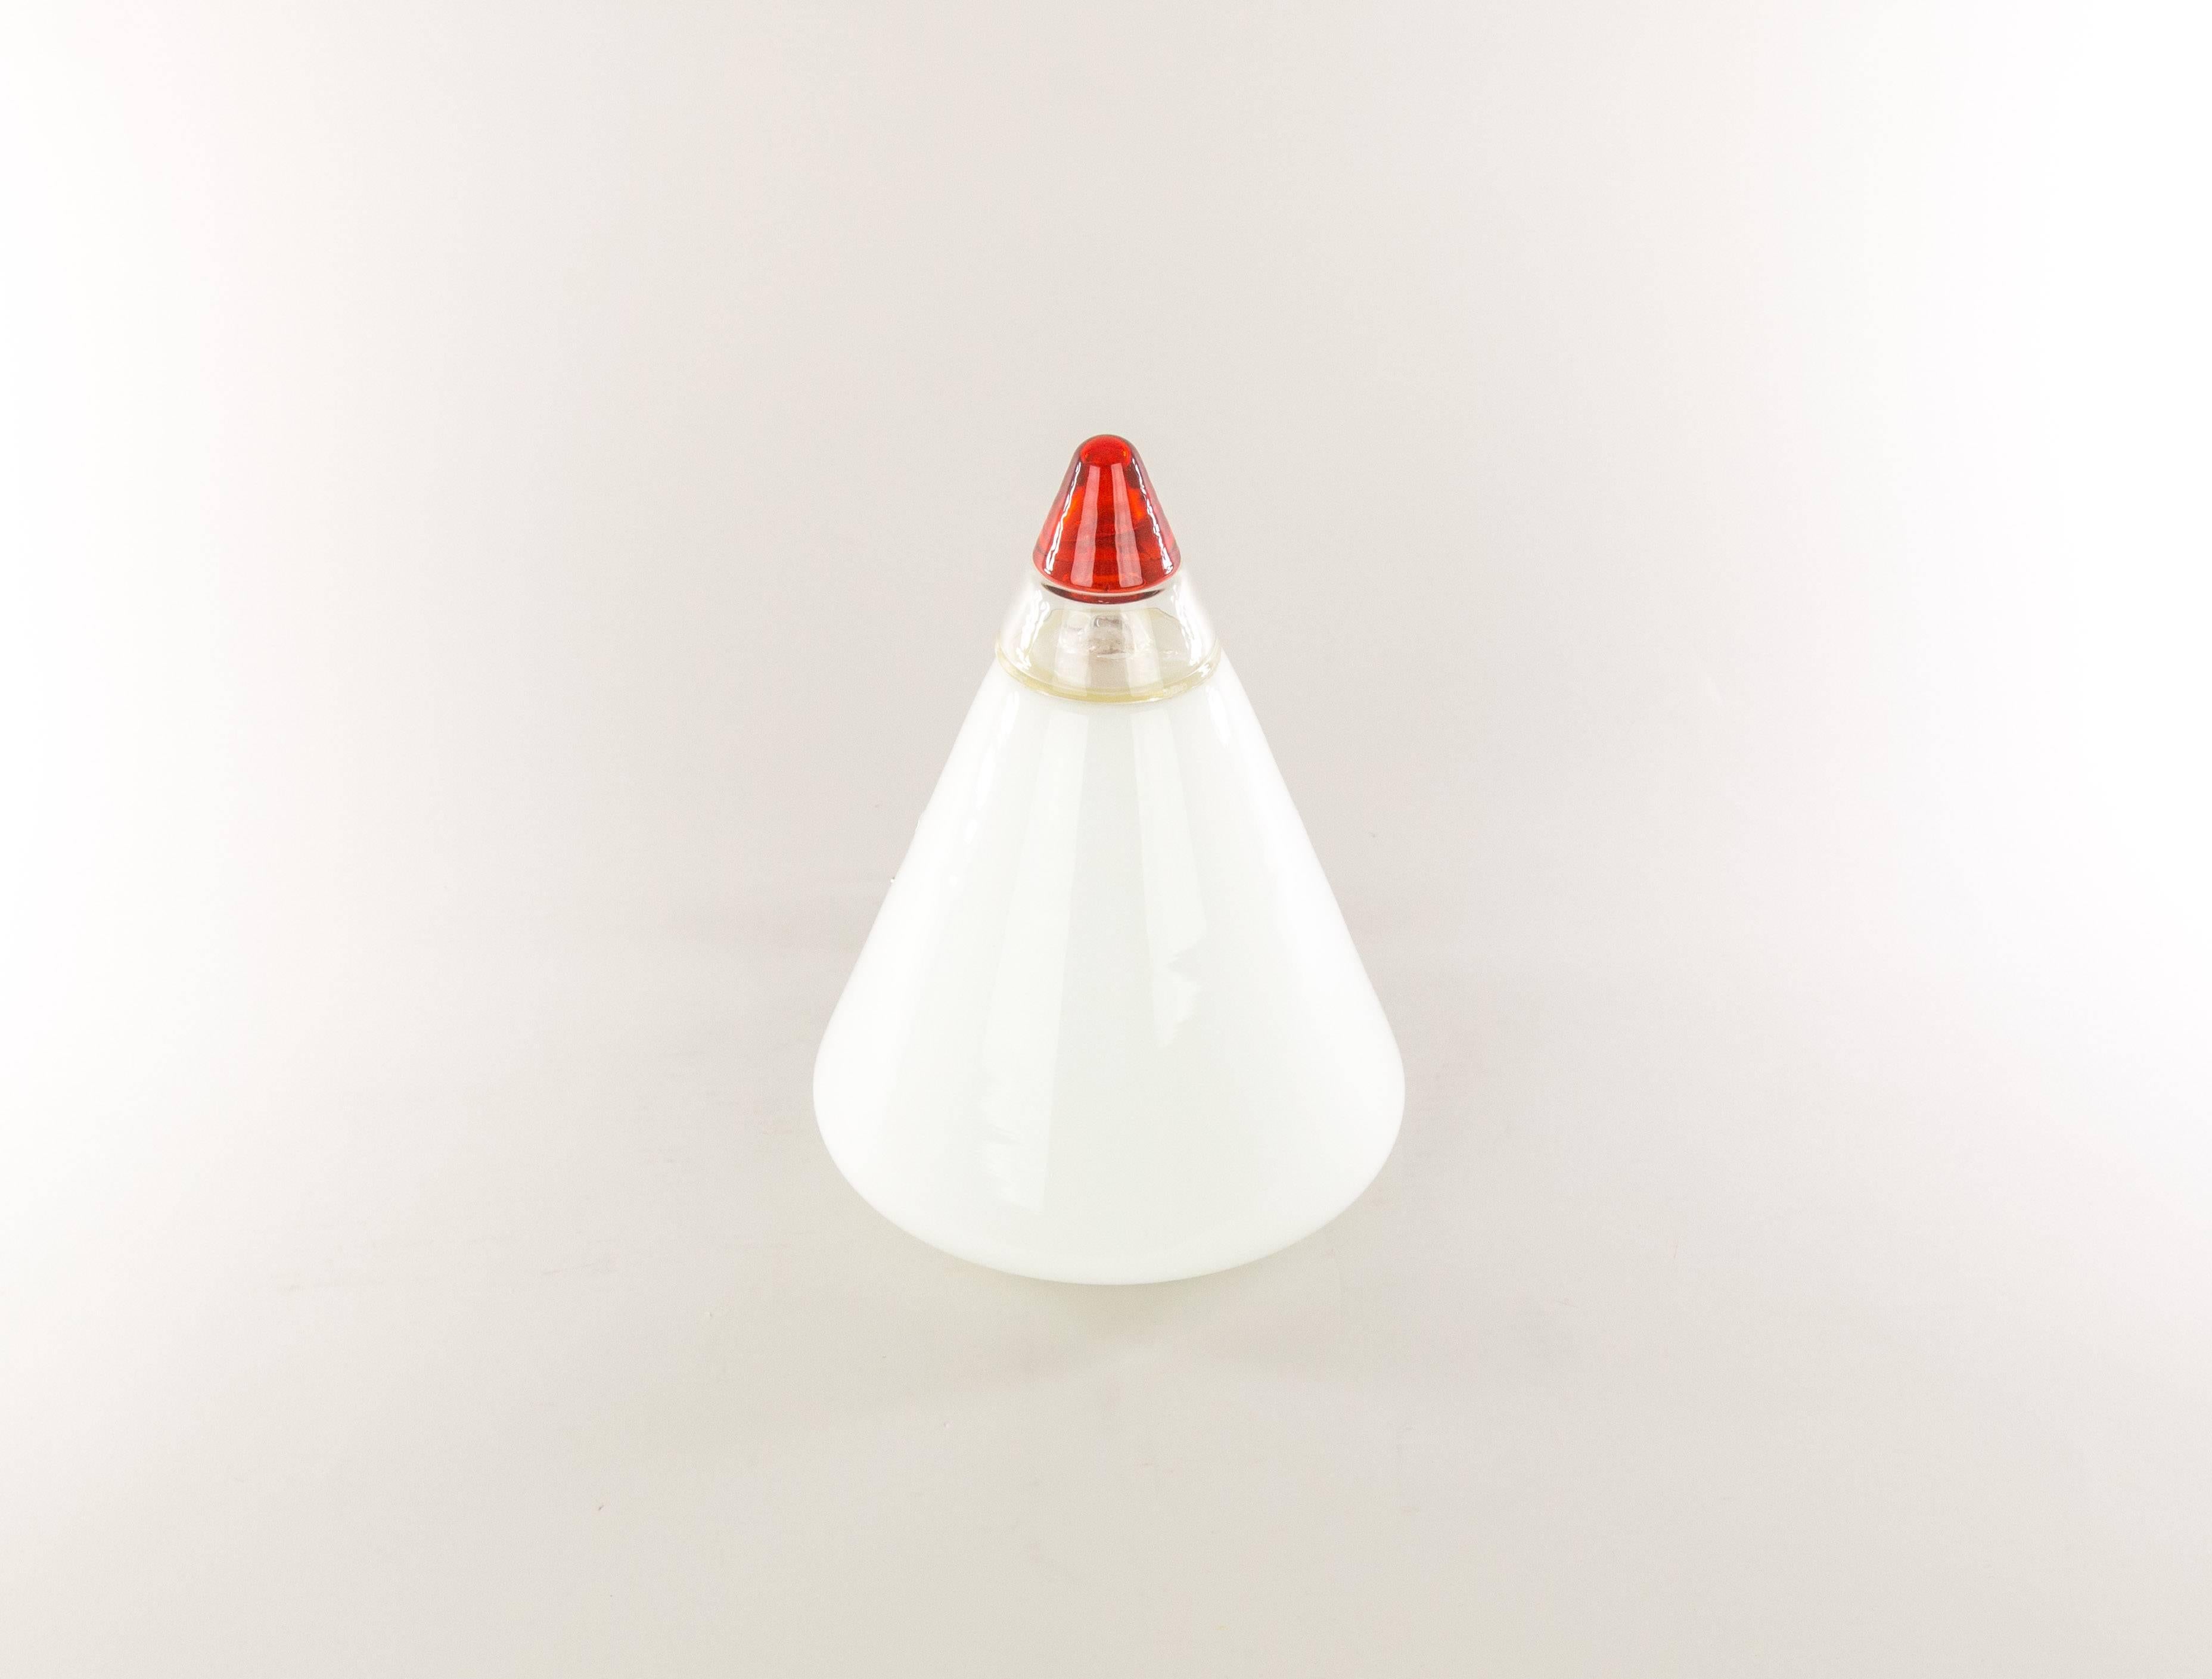 Rio table lamp designed by Giusto Toso for Italian manufacturer Leucos.

The cone-shaped lamp is made of hand blown white and red glass and has a crystal band as a decoration.

The glass part is supported by a white plastic base that is marked